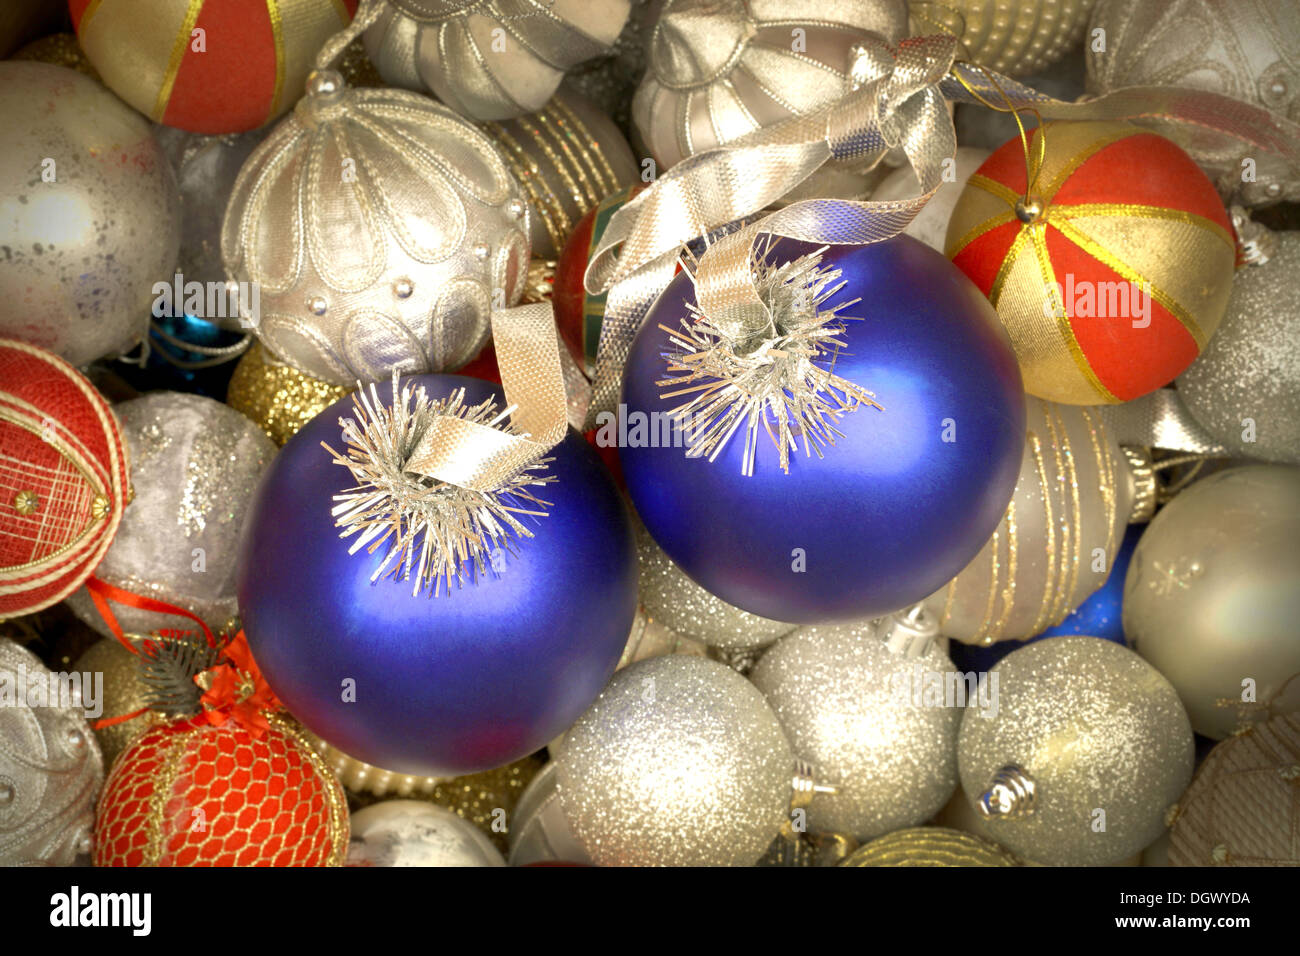 Mix of white, blue and golden red Christmas balls Stock Photo